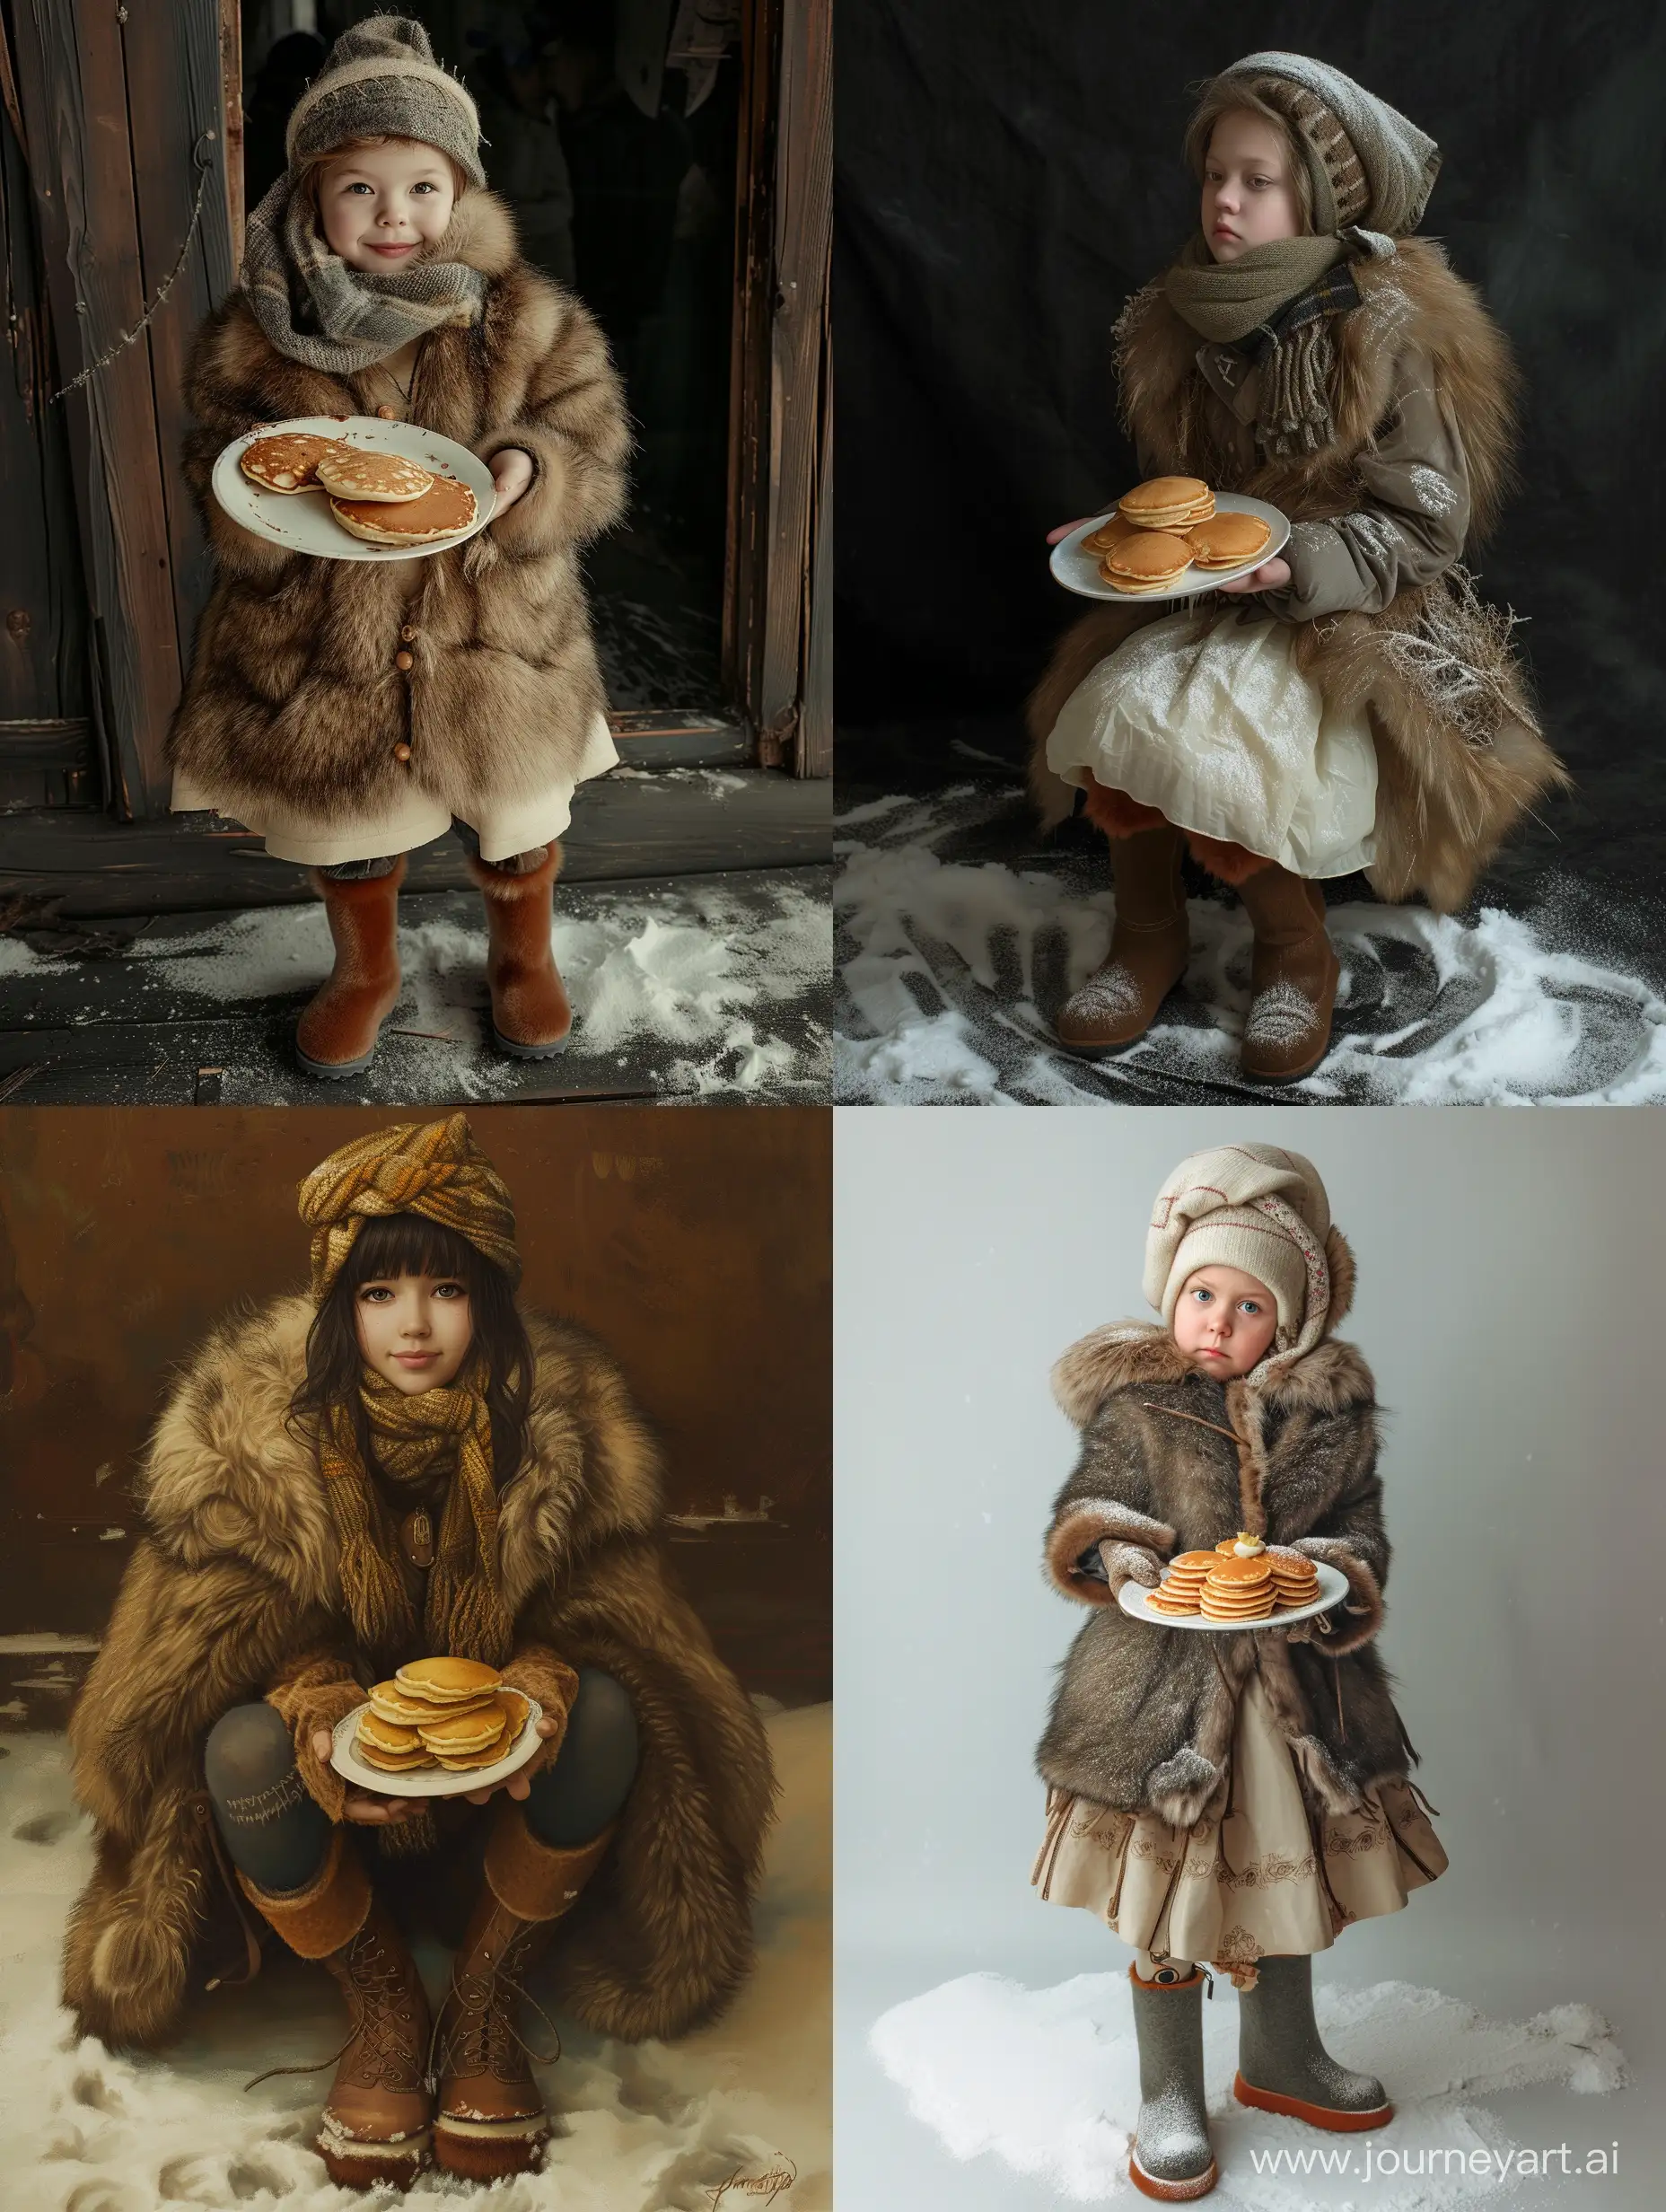 Russian-Winter-Fashion-Cozy-Girl-with-Pancakes-in-Fur-Coat-and-Felt-Boots